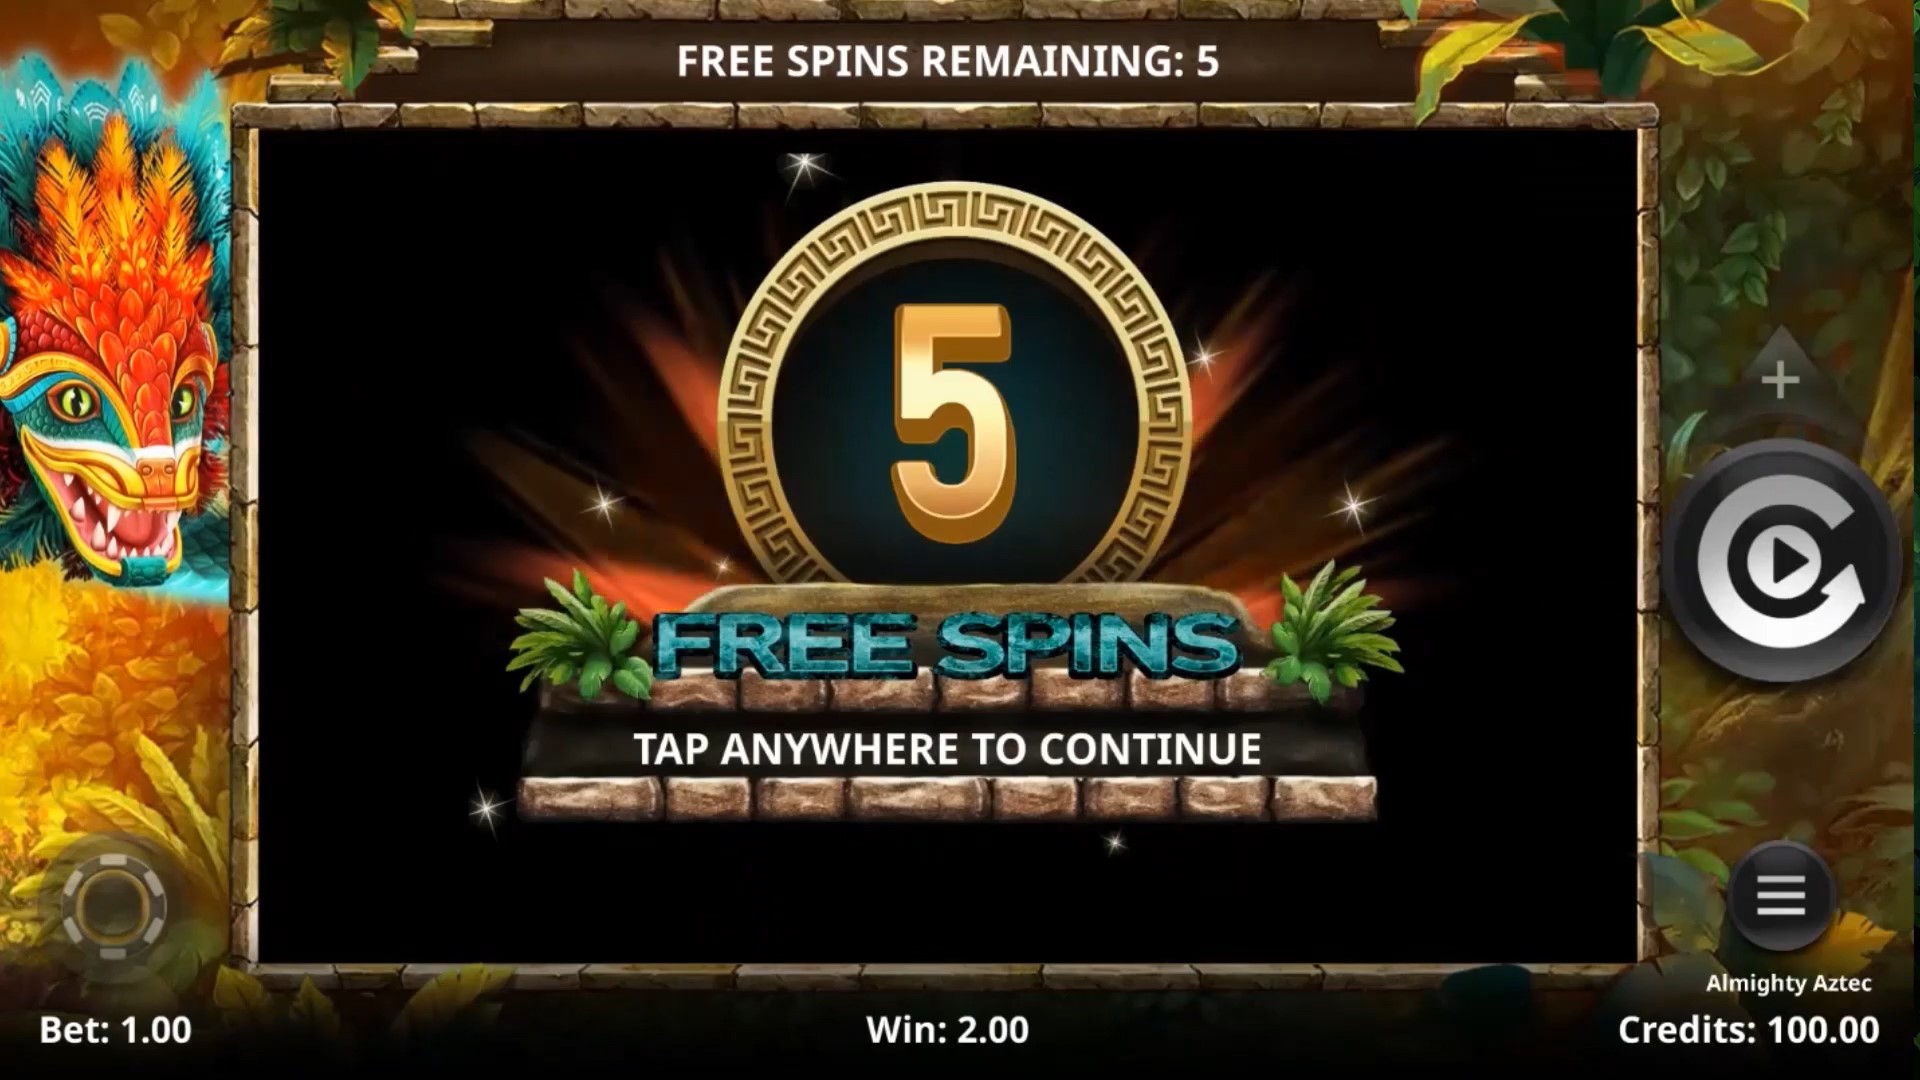 Almighty Aztec free spin SpinPlay Games